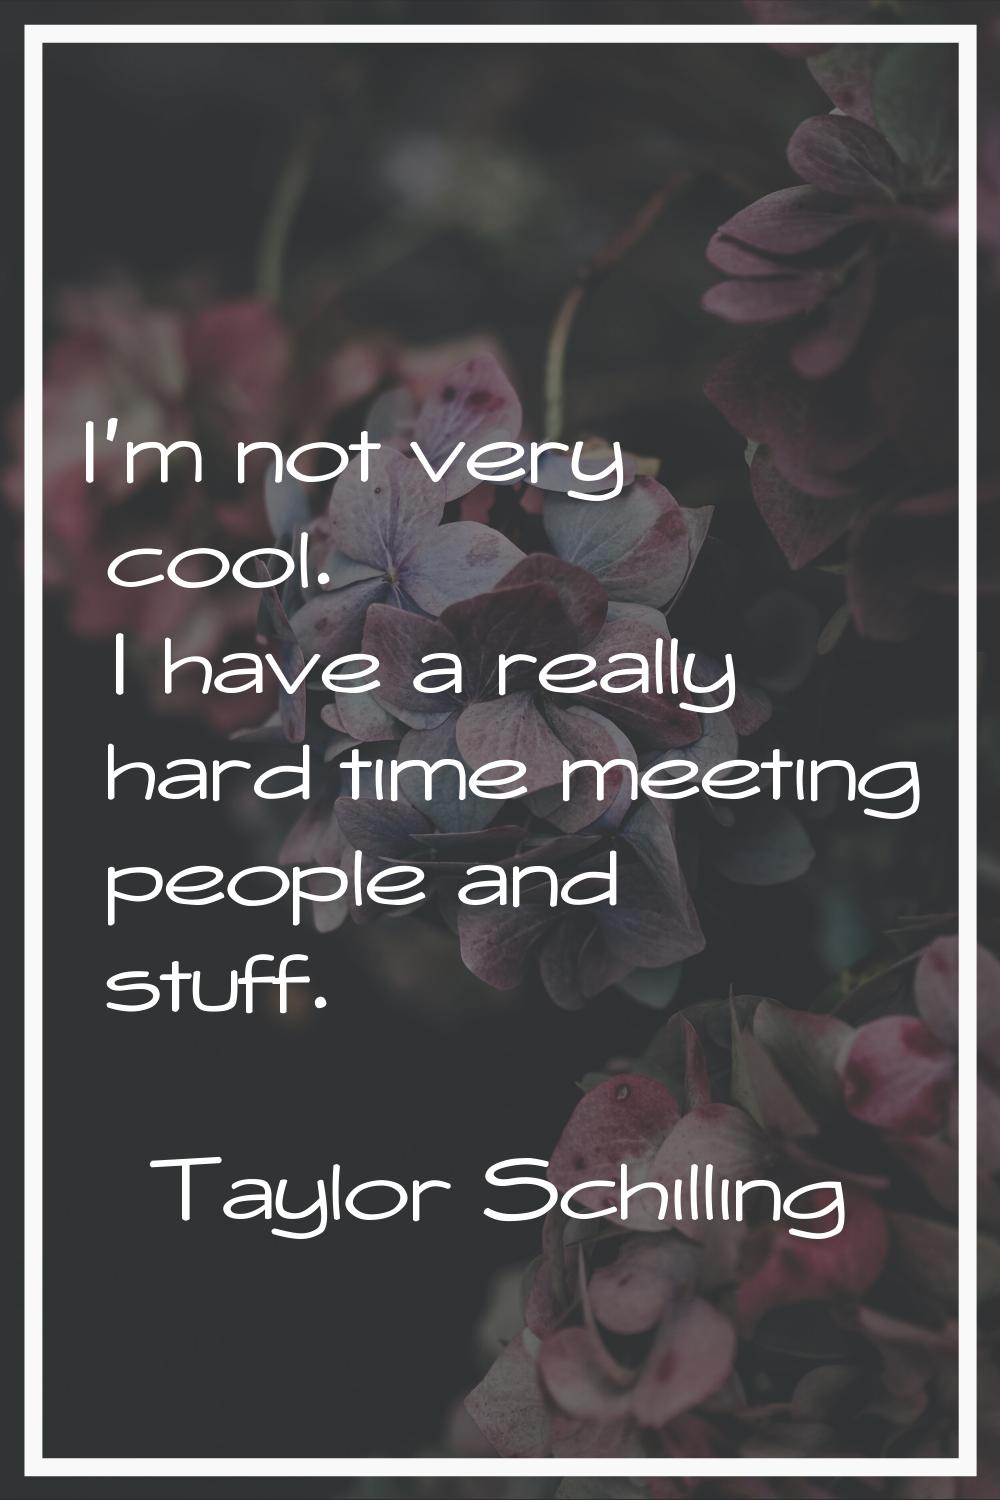 I'm not very cool. I have a really hard time meeting people and stuff.